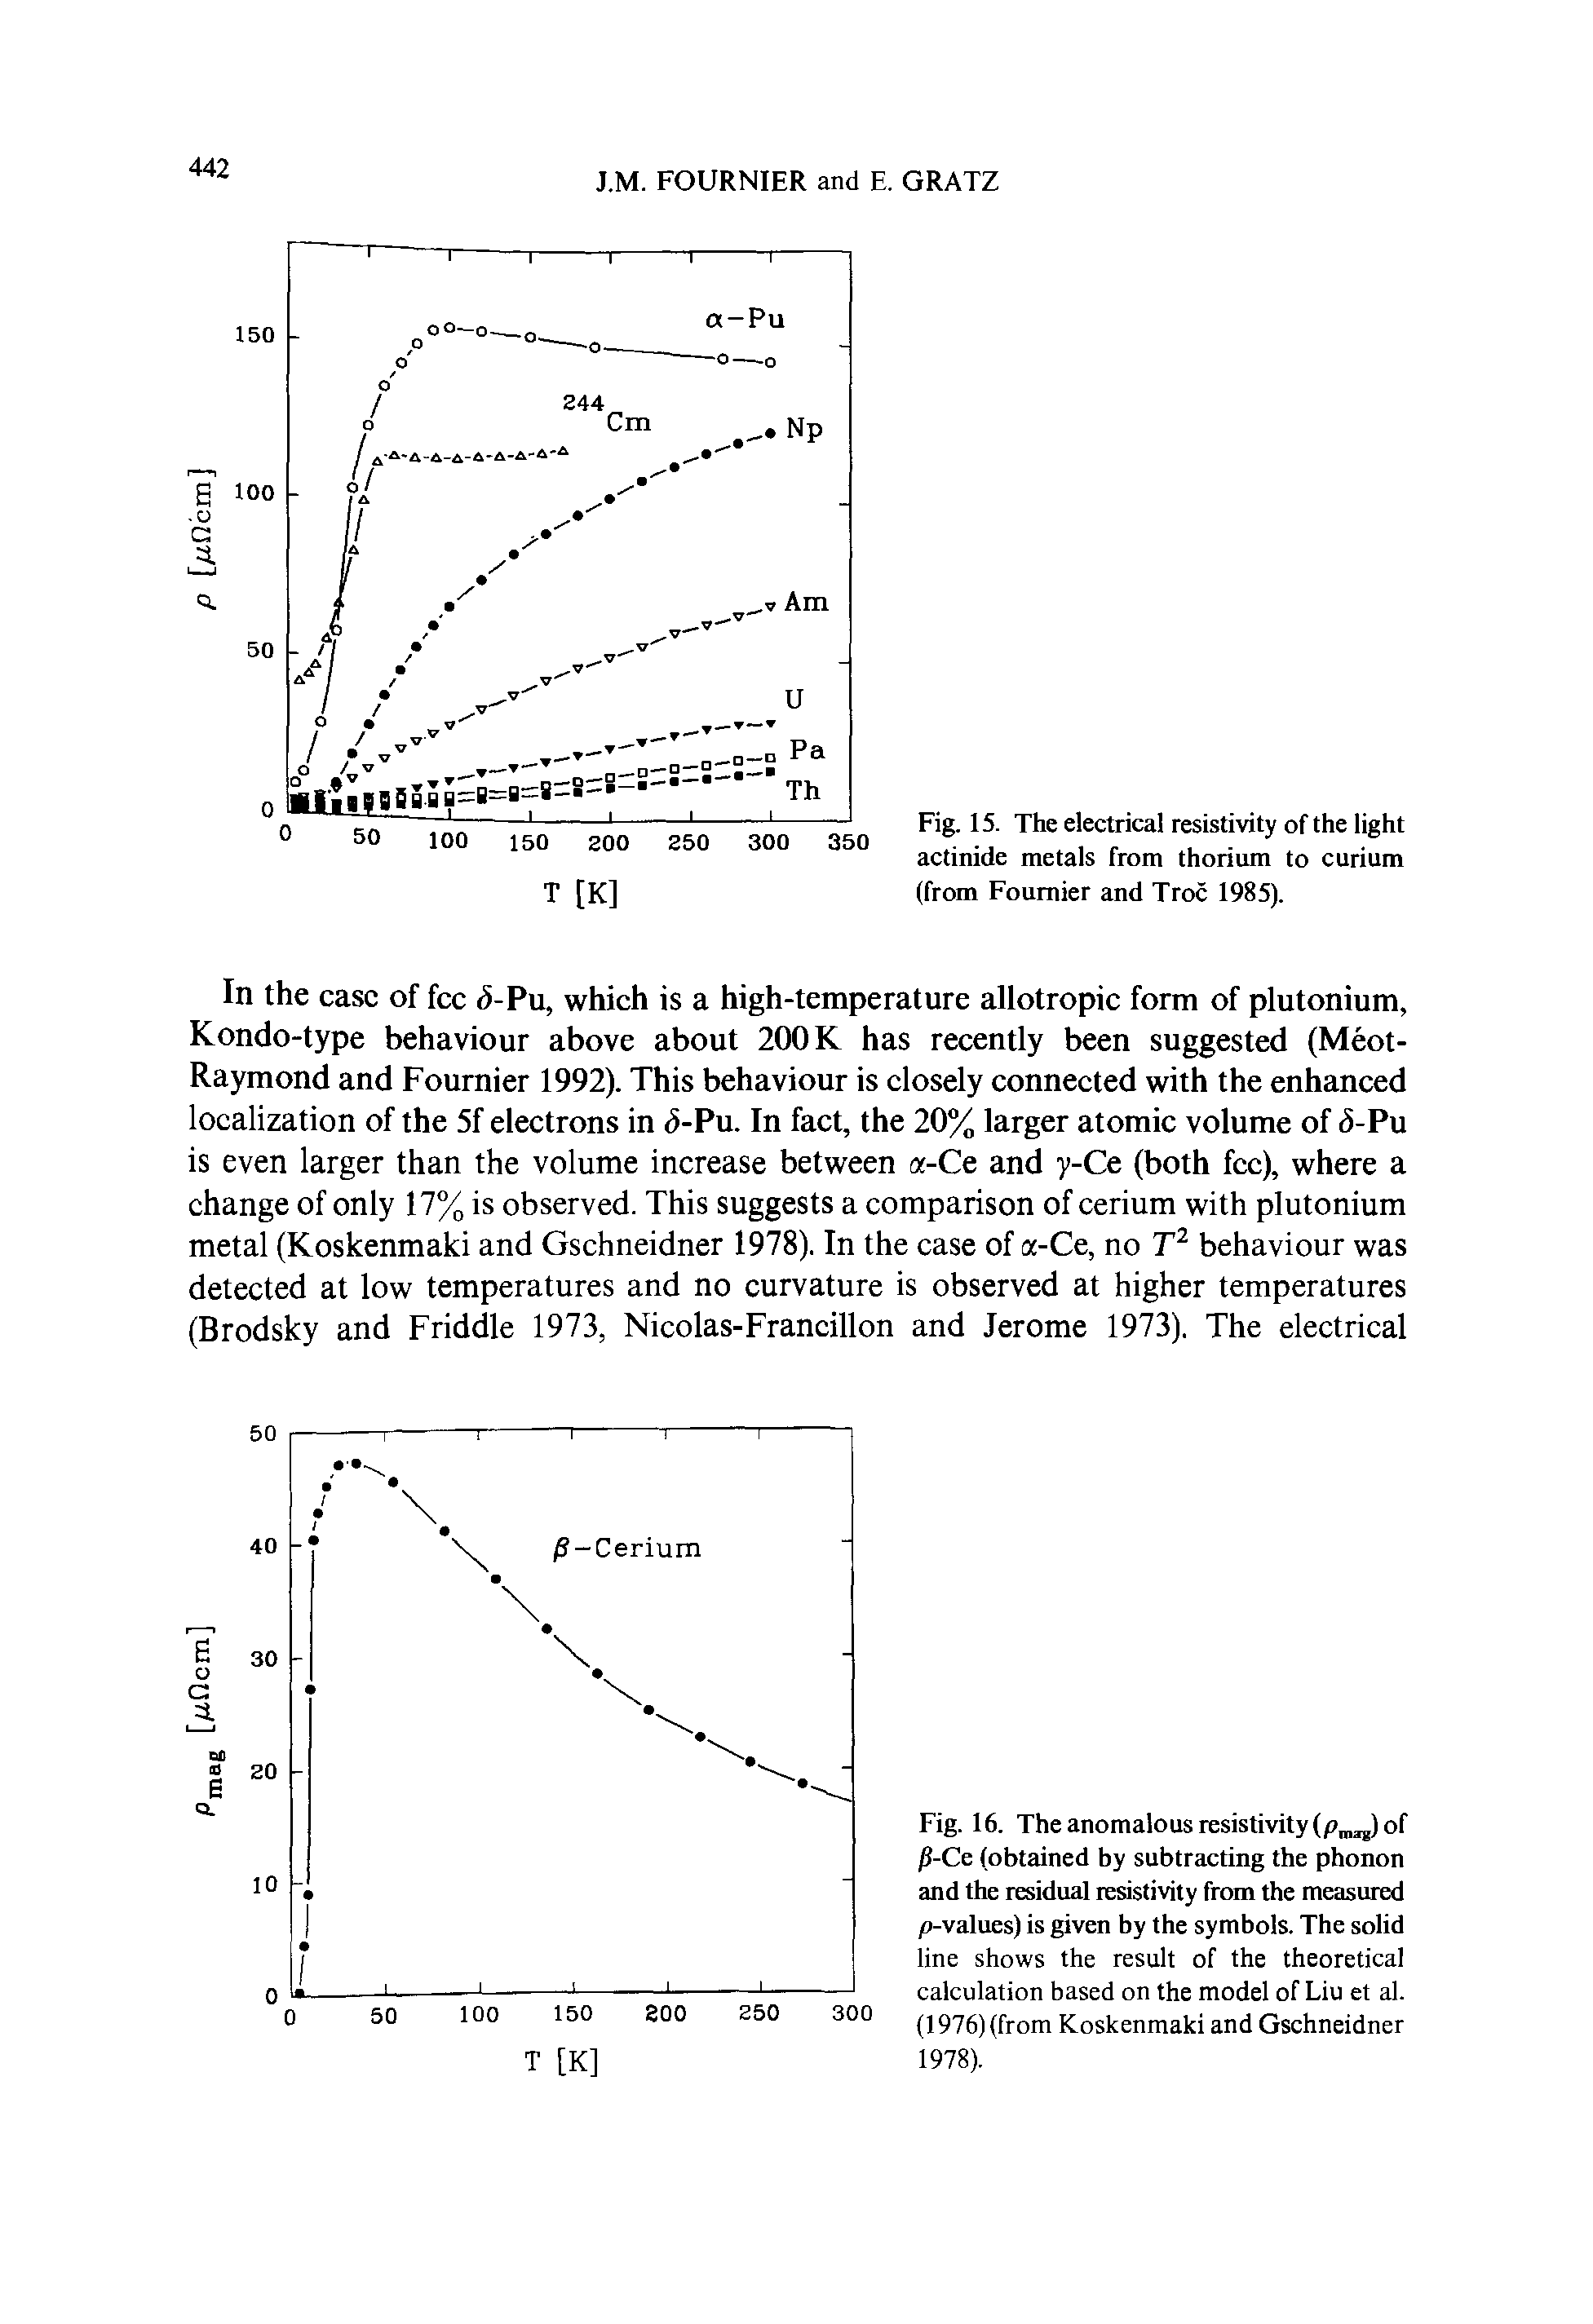 Fig. 15. The electrical resistivity of the light actinide metals from thorium to curium (from Fournier and Troc 1985).